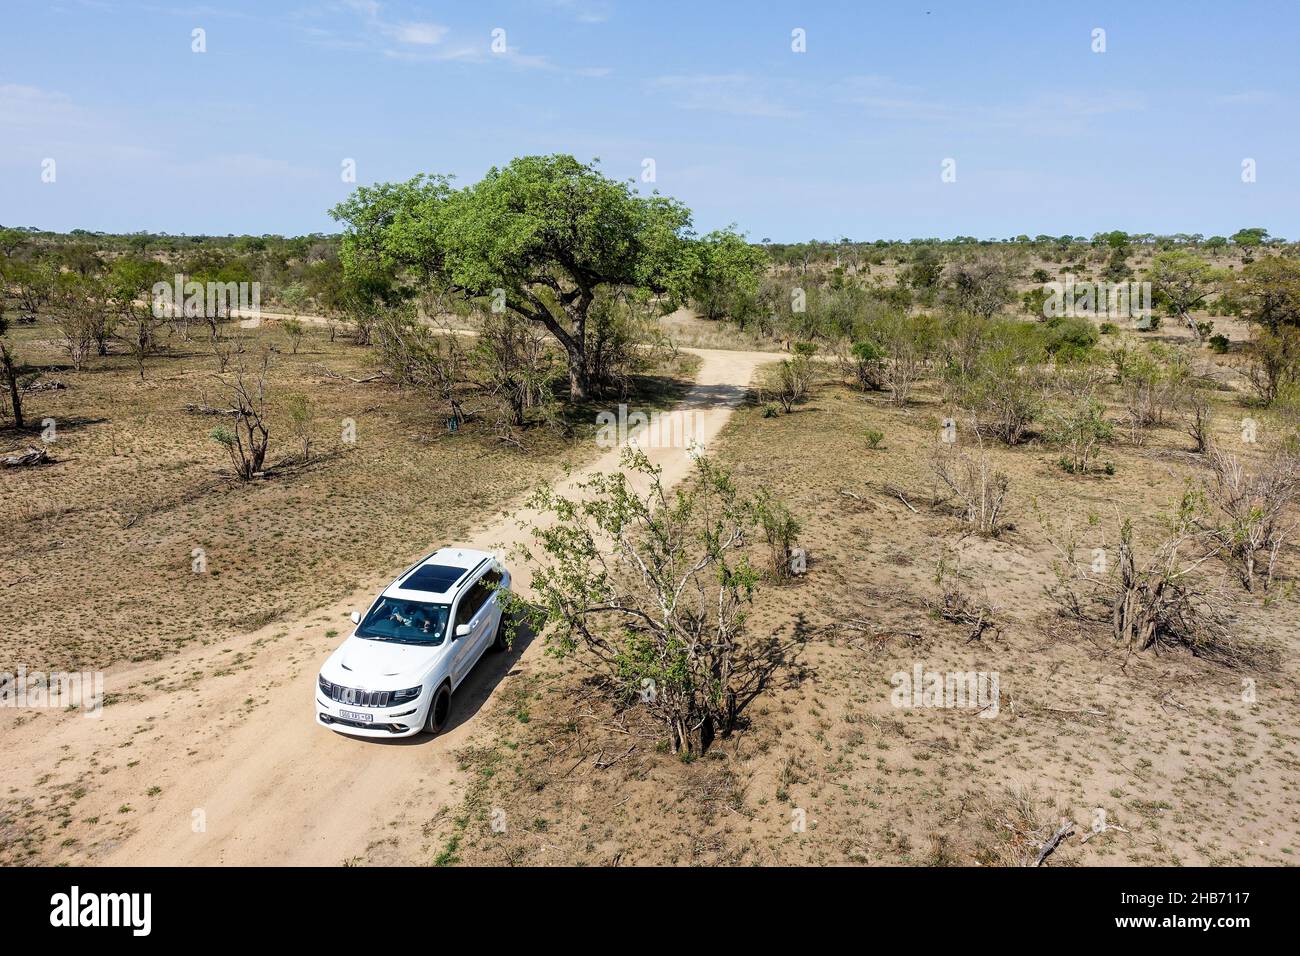 Vehicle driving in the Kruger National Park, South Africa Stock Photo